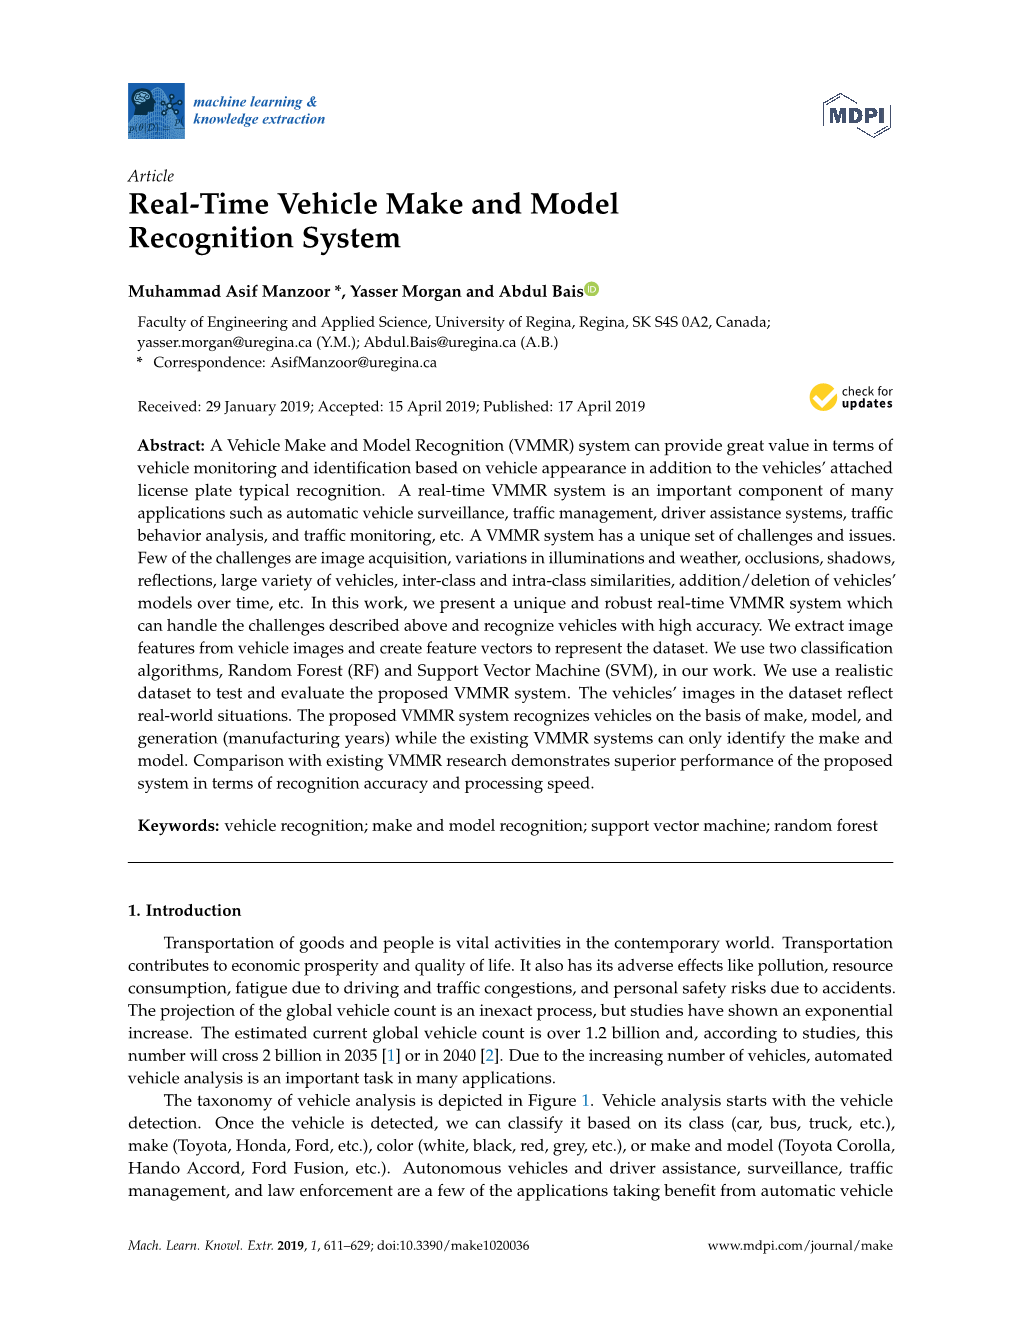 Real-Time Vehicle Make and Model Recognition System